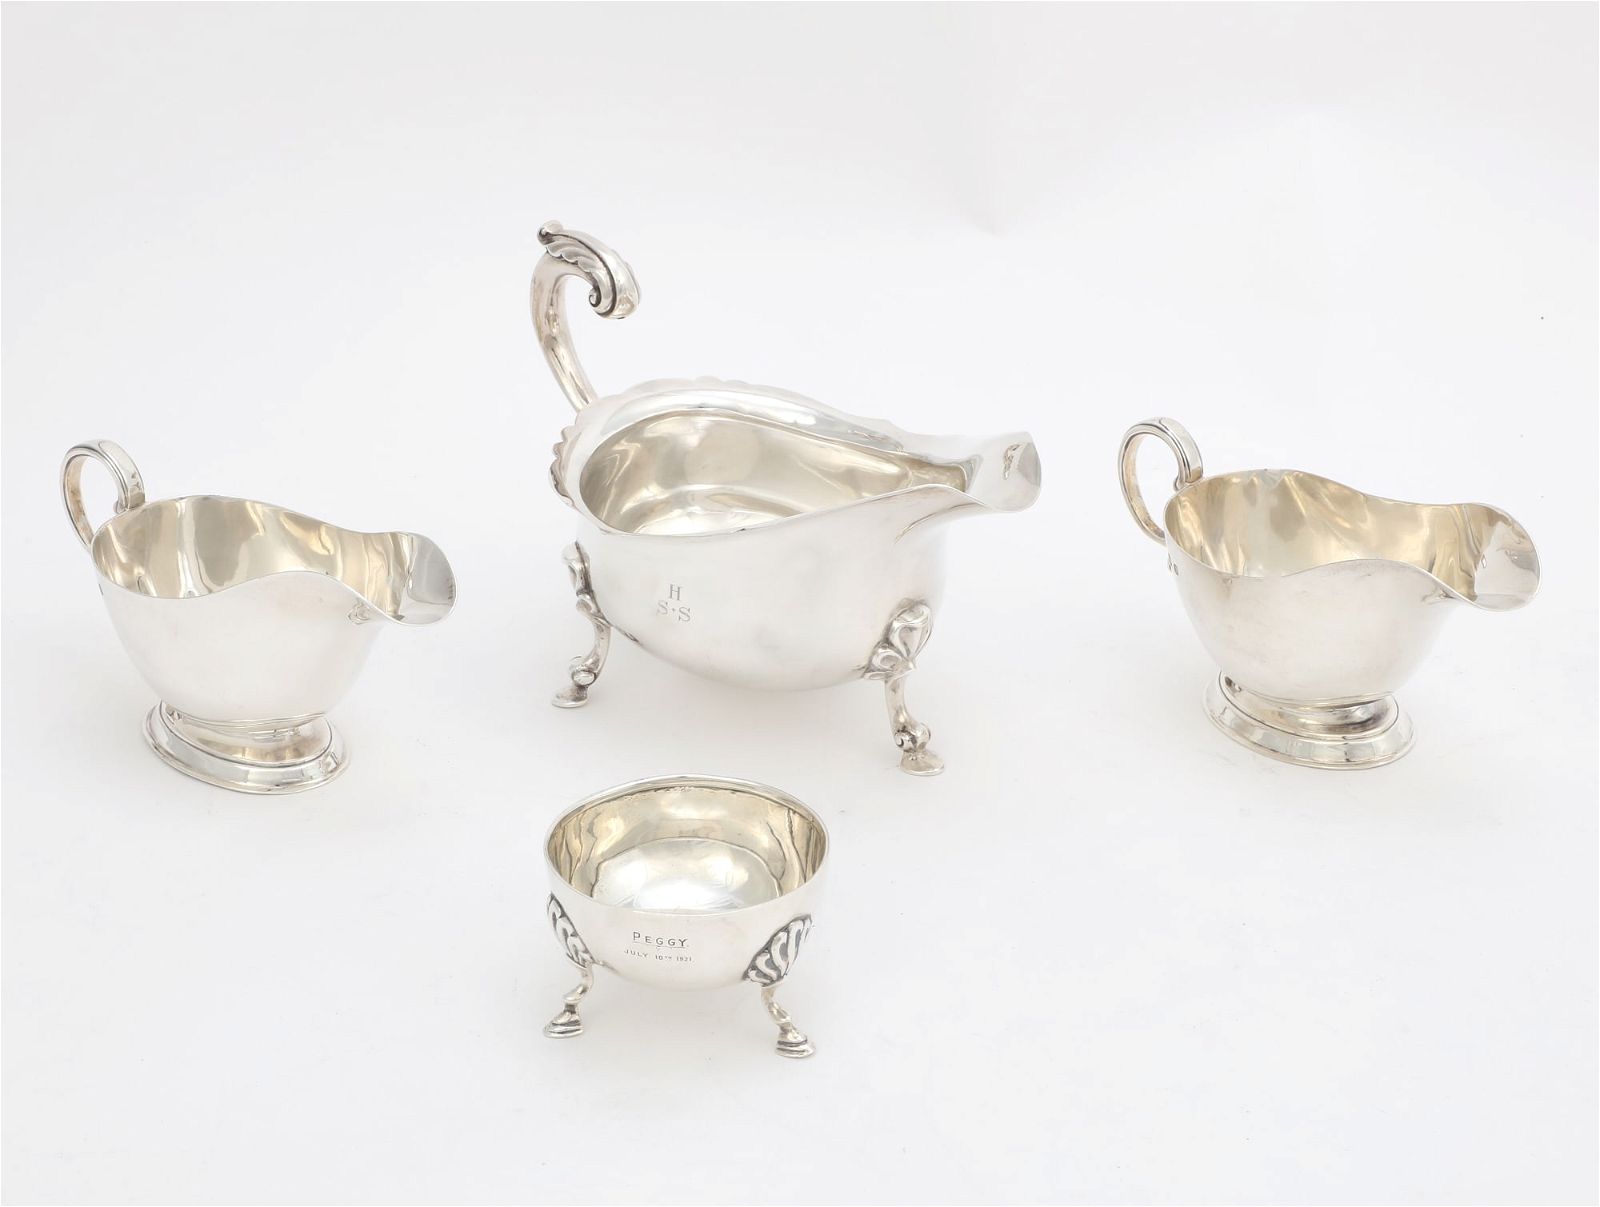 FOUR ENGLISH STERLING SILVER CONDIMENTWARESFour 2fb2ced